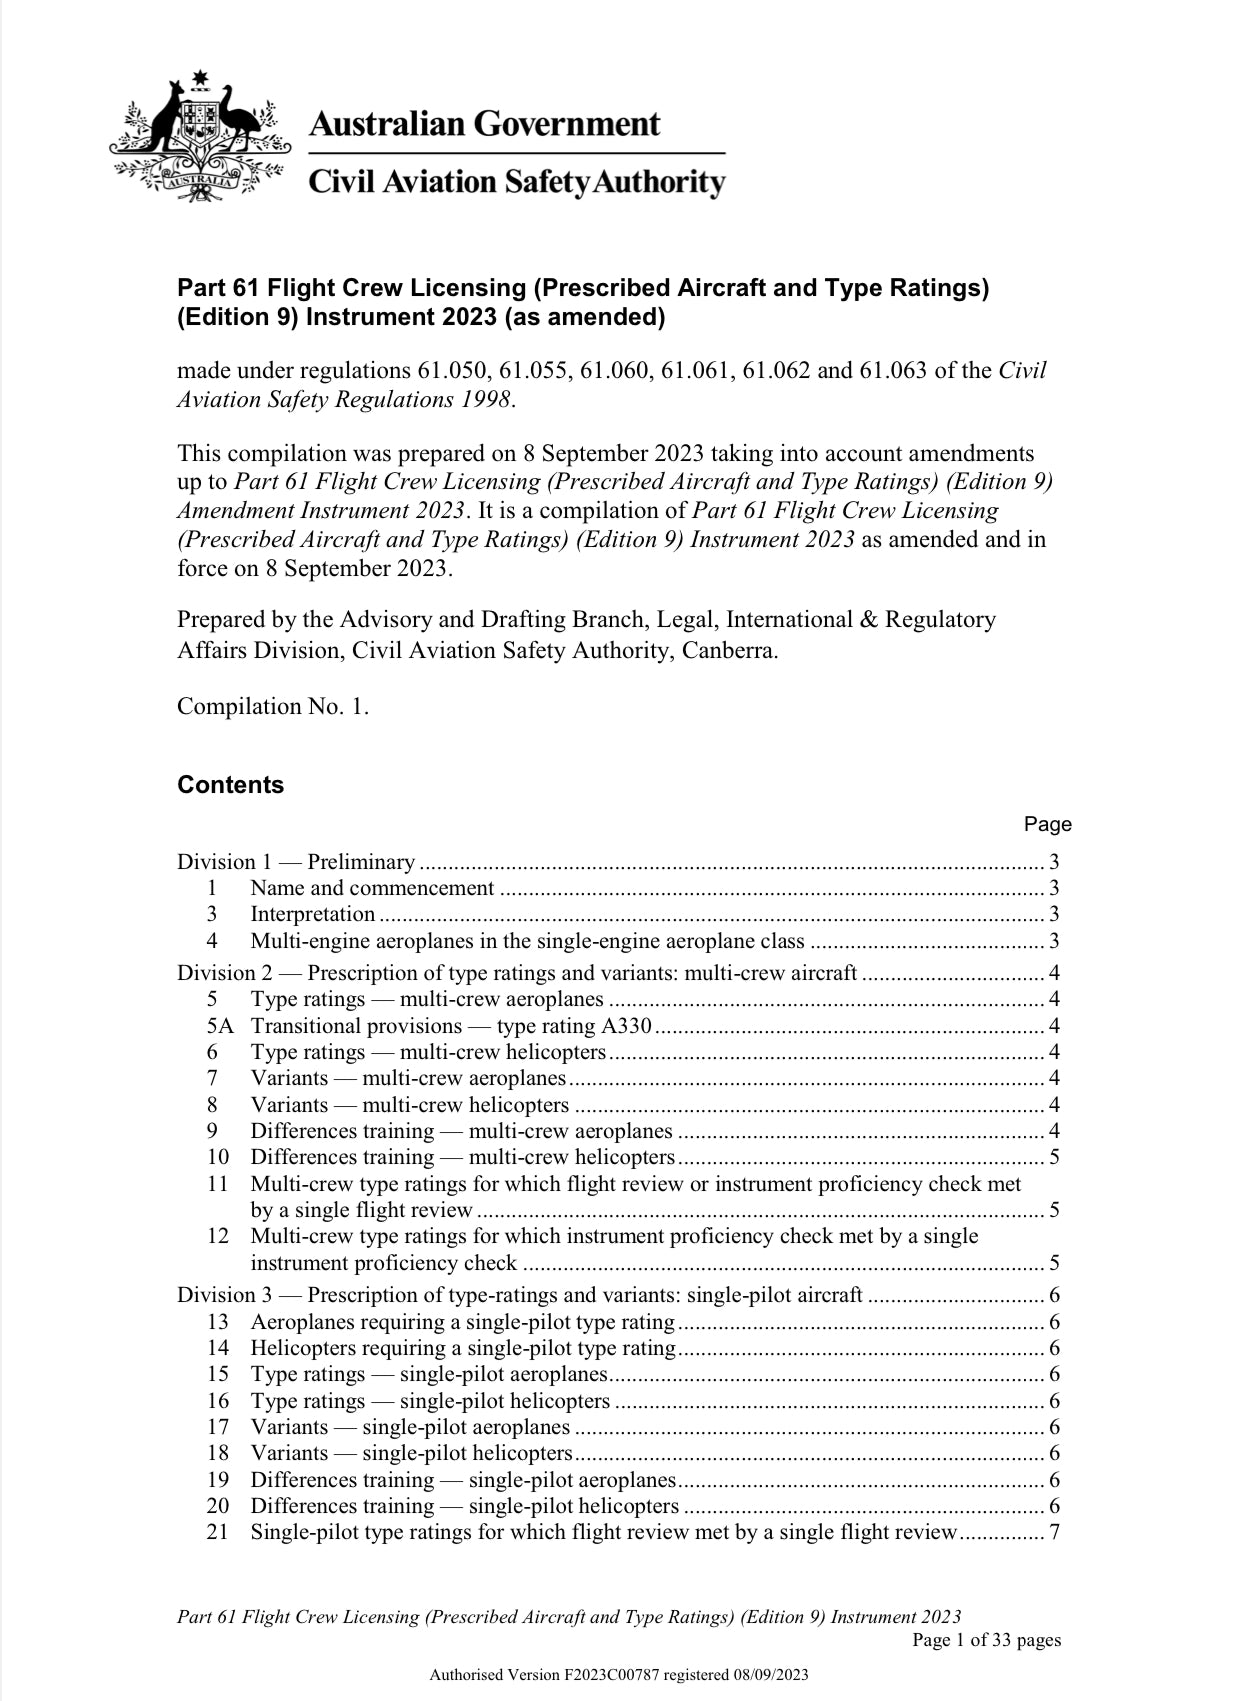 Part 61 Flight Crew Licensing (Prescribed Aircraft and Type Ratings)
(Edition 9) Instrument 2023 (as amended)